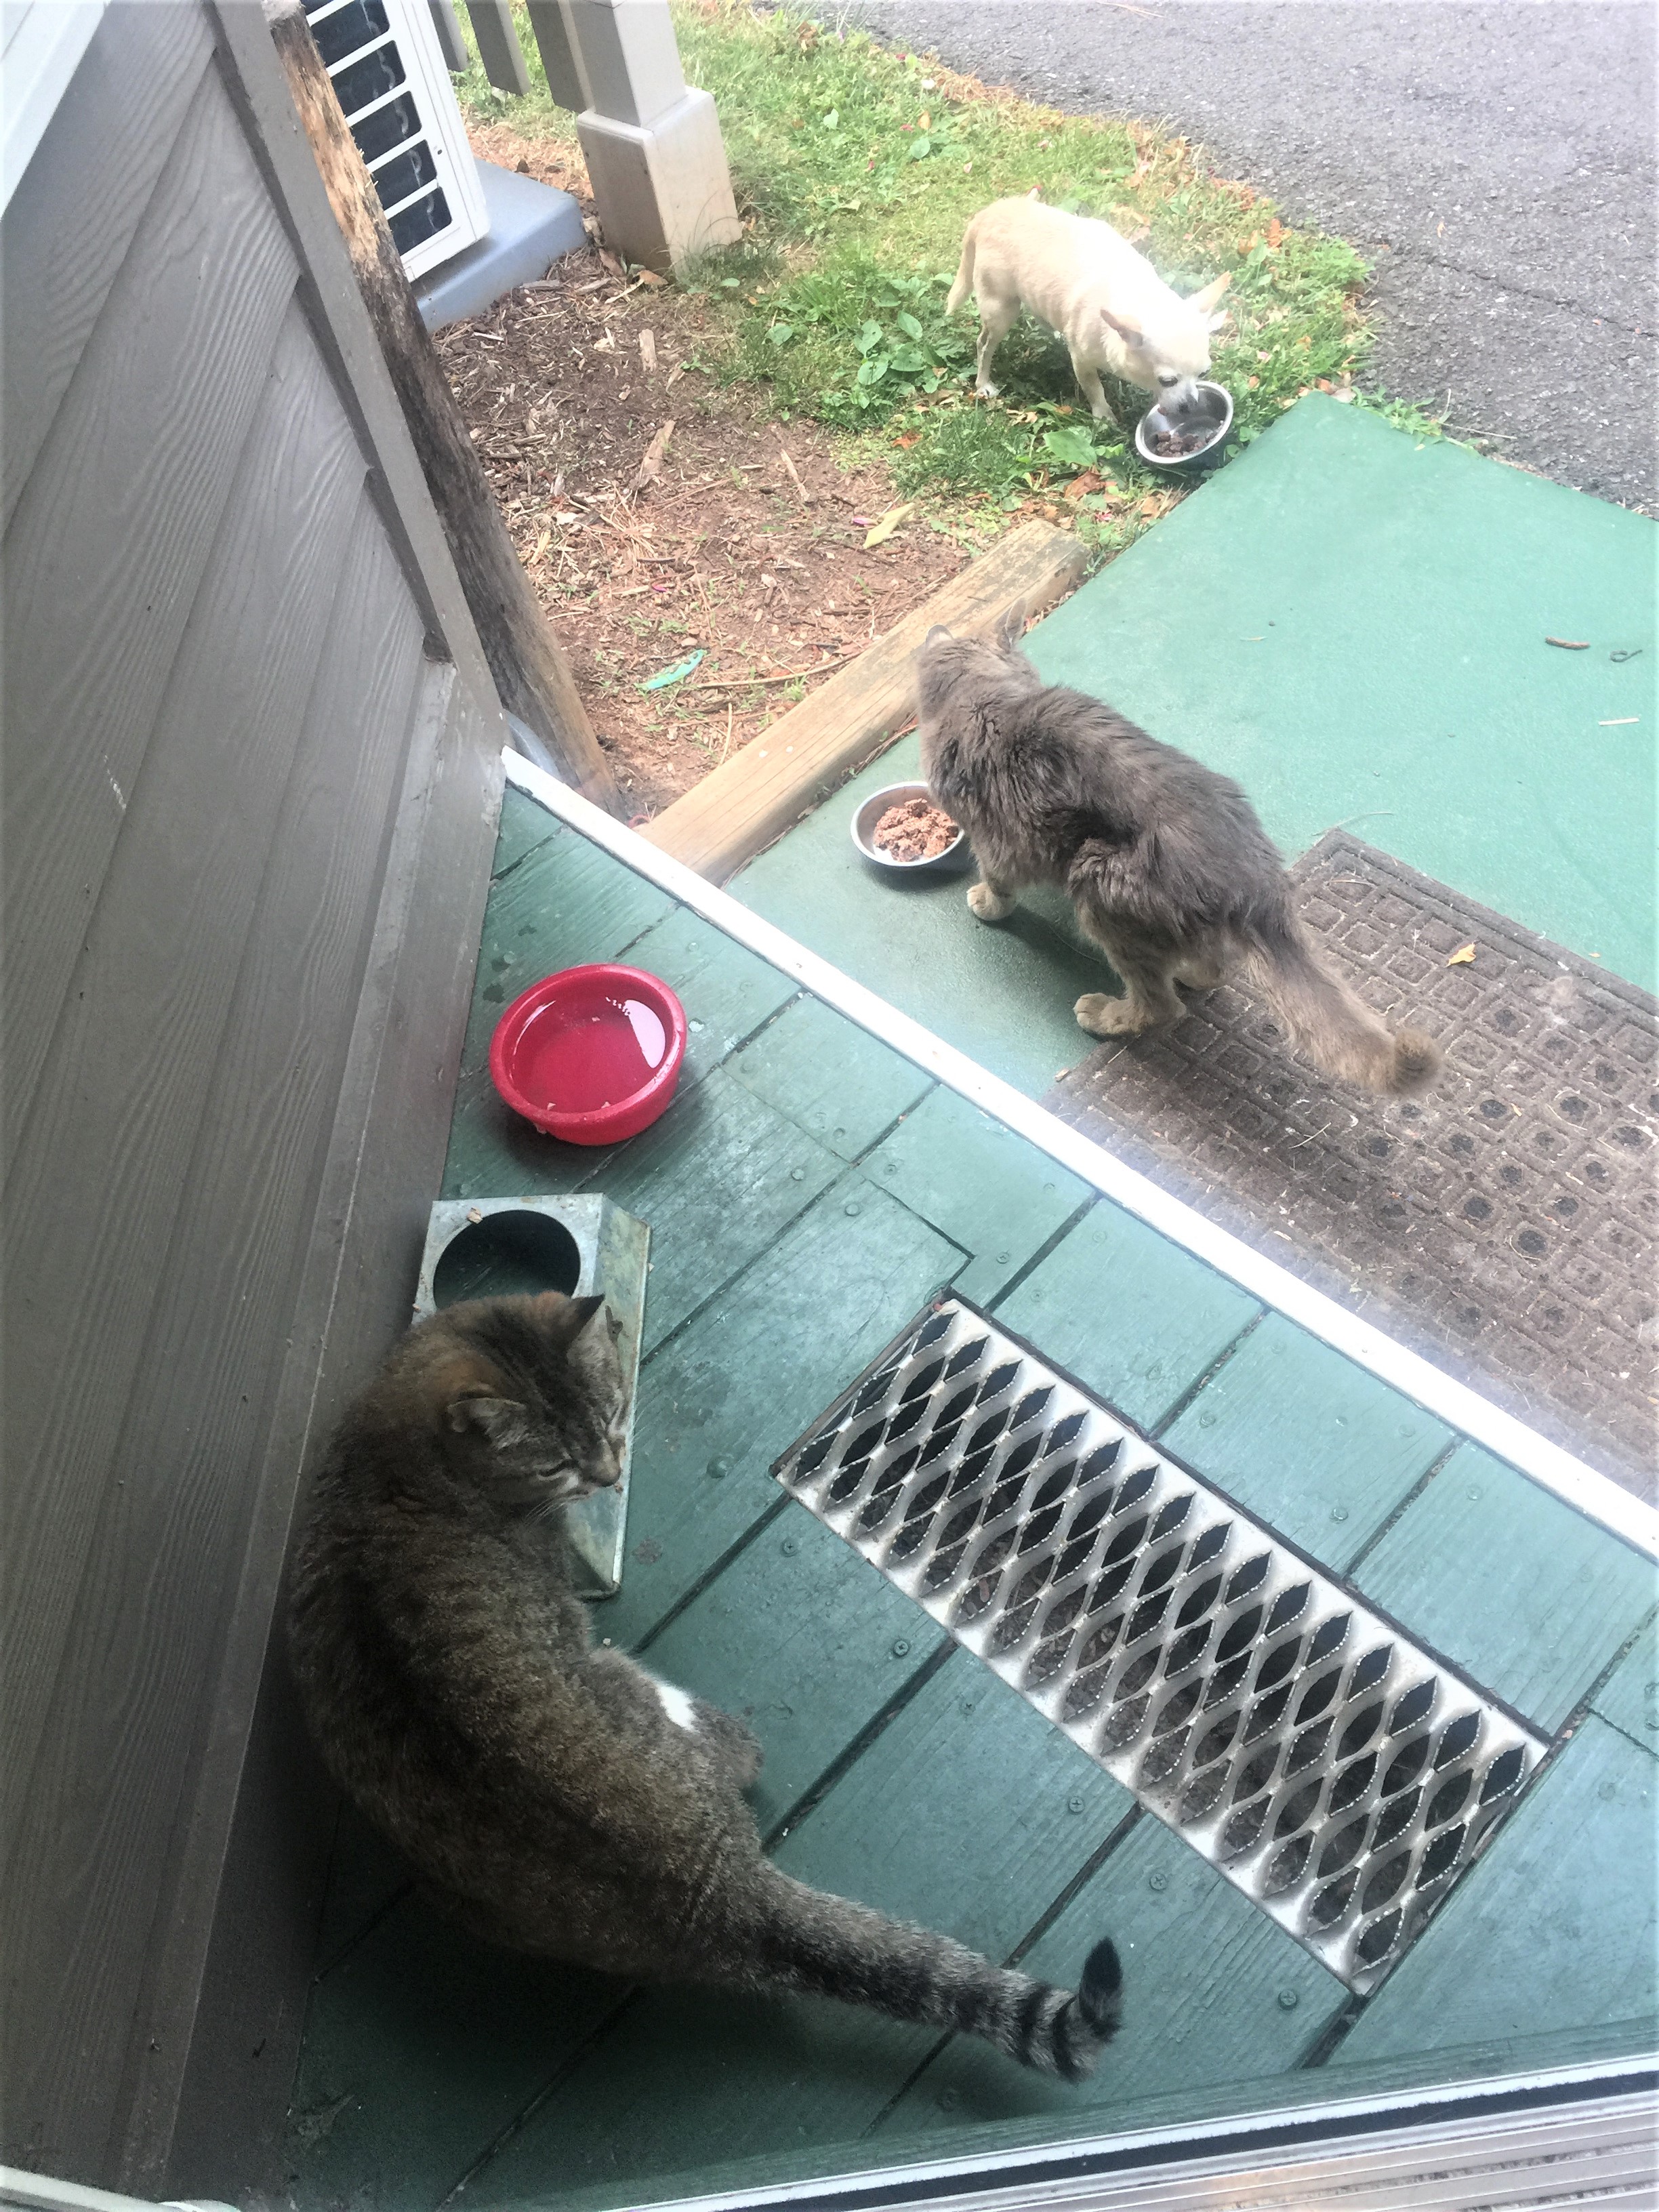 The "Breakfast Club" (Bibb, Shadow and Backpack) eating from their bowls at the Andon-Reid Inn kitchen door.